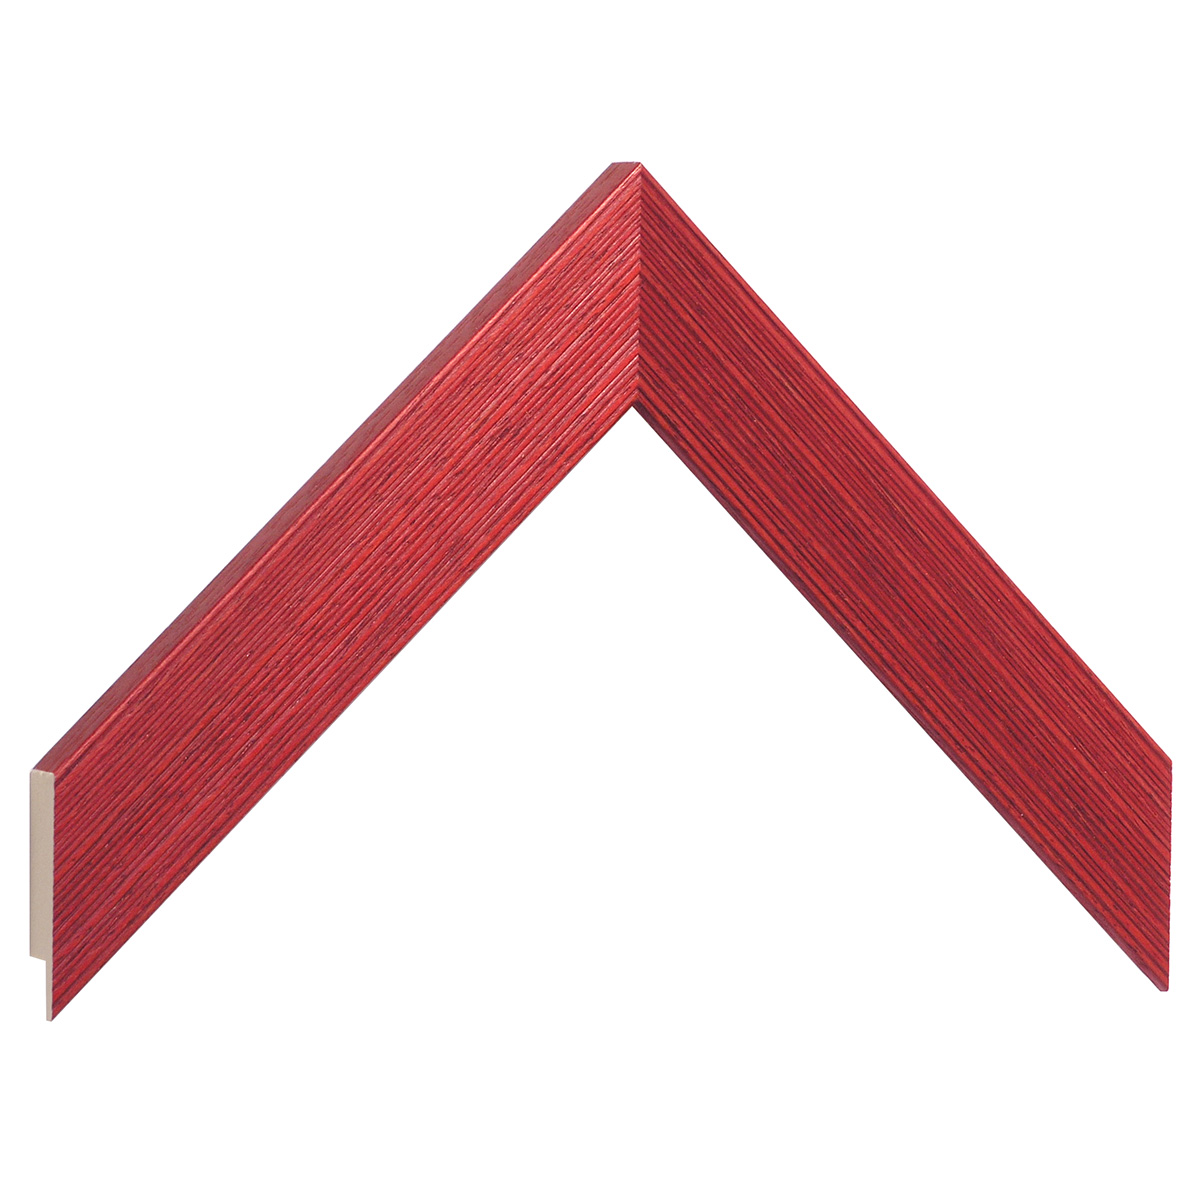 Moulding ayous, width 30mm height 14 - streaked red finish - Sample